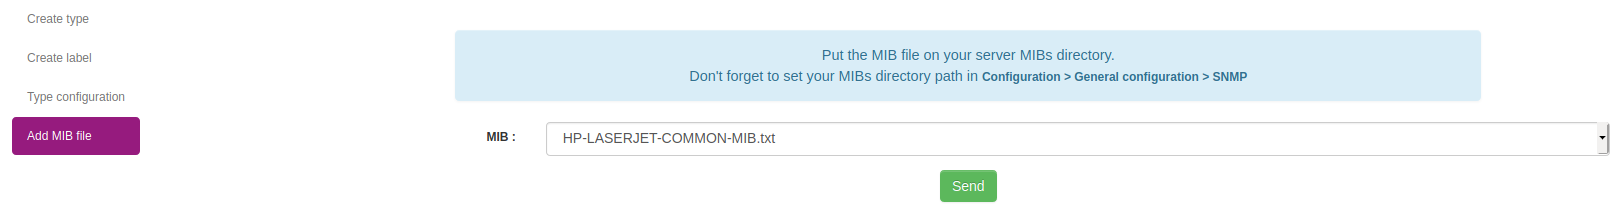 SNMP feature MIB